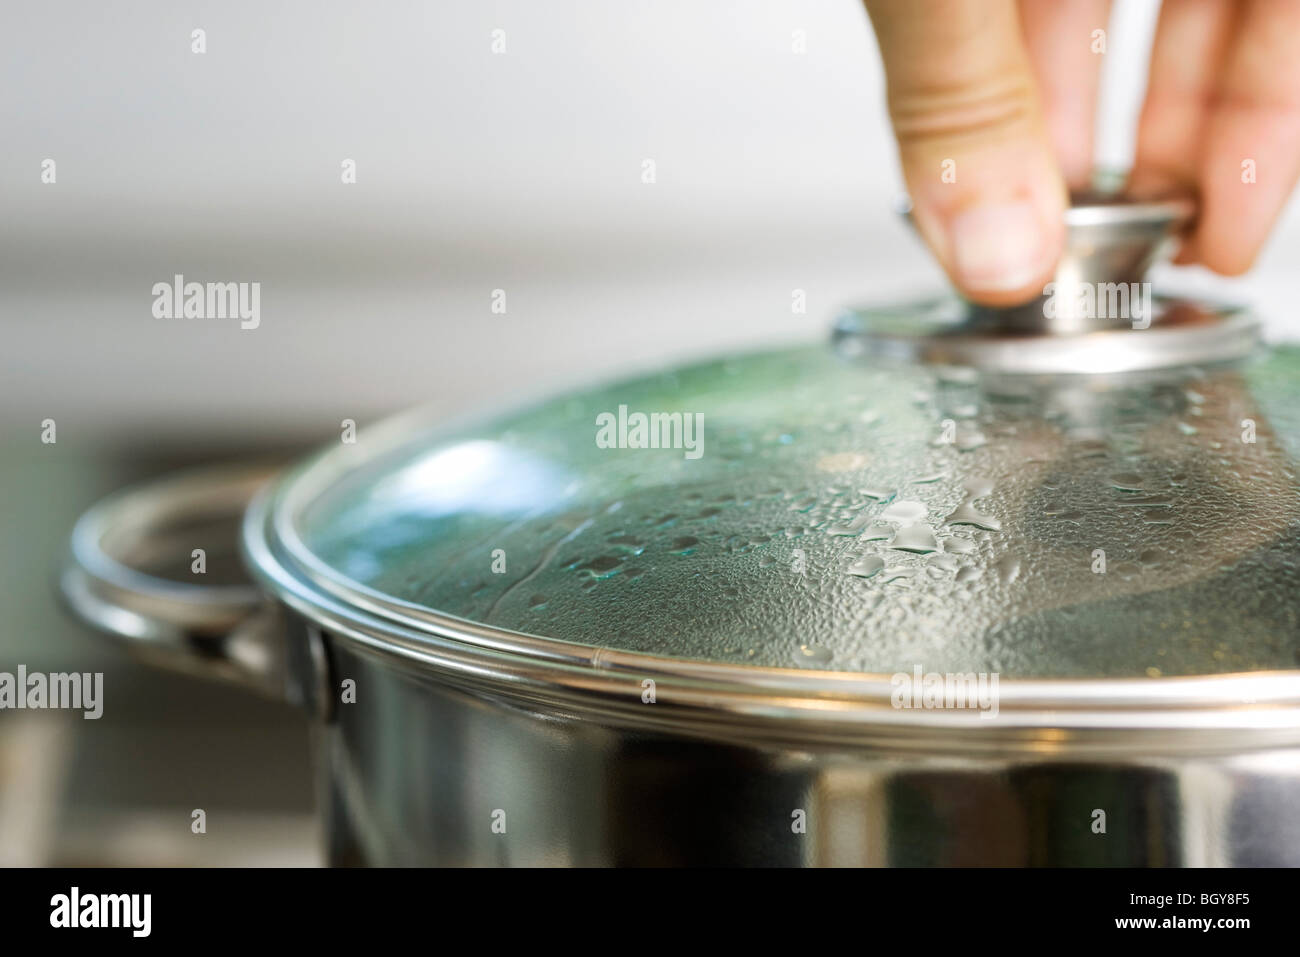 Condensation On Pot Lids Can Be Messy. Fix It With An Easy Towel Trick